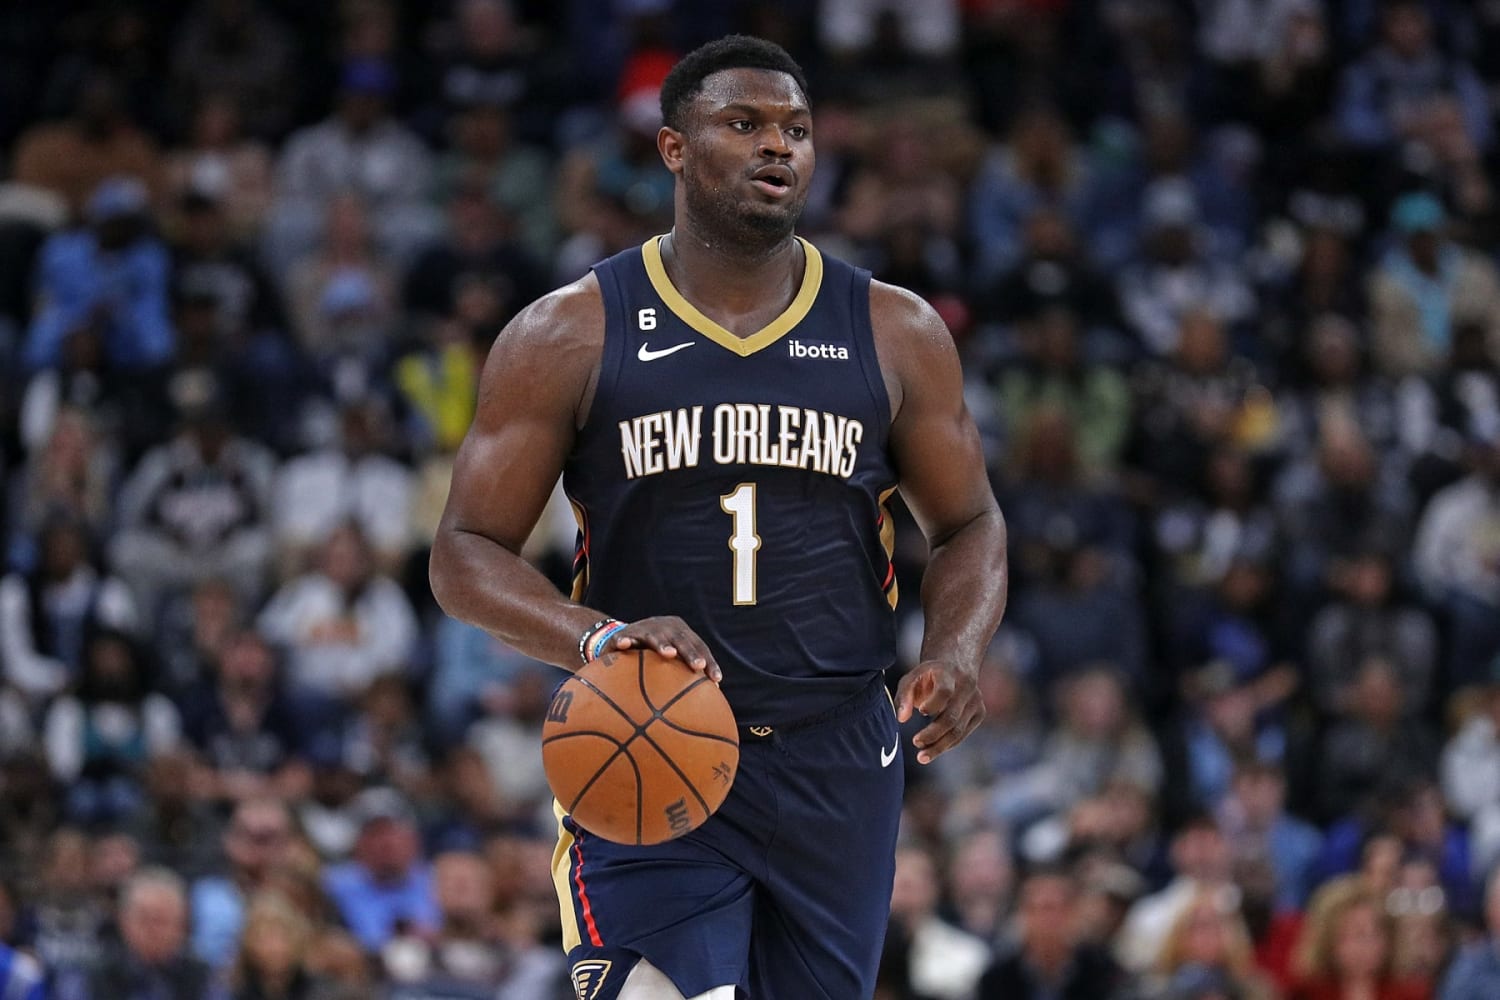 Youth Nike Zion Williamson White New Orleans Pelicans 2021/22